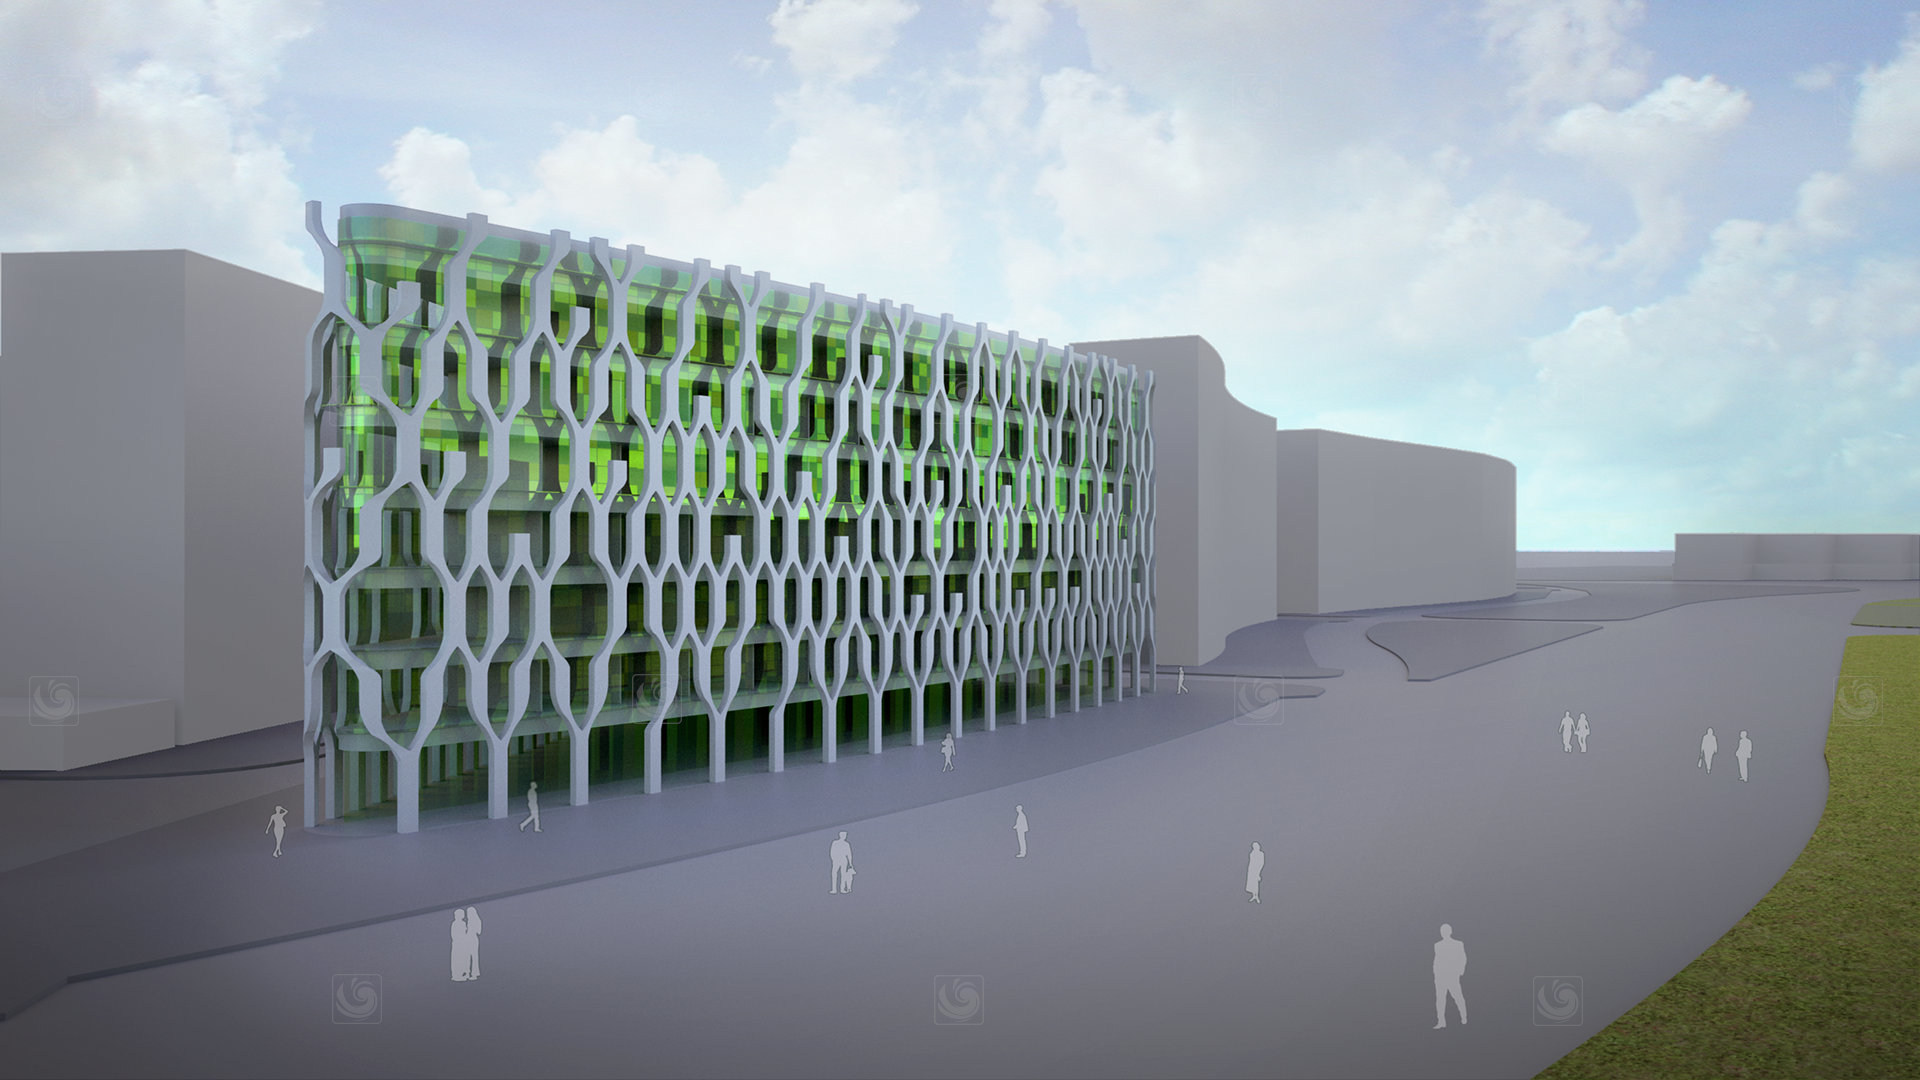 Side view of building materialized by means of infoarchitecture techniques